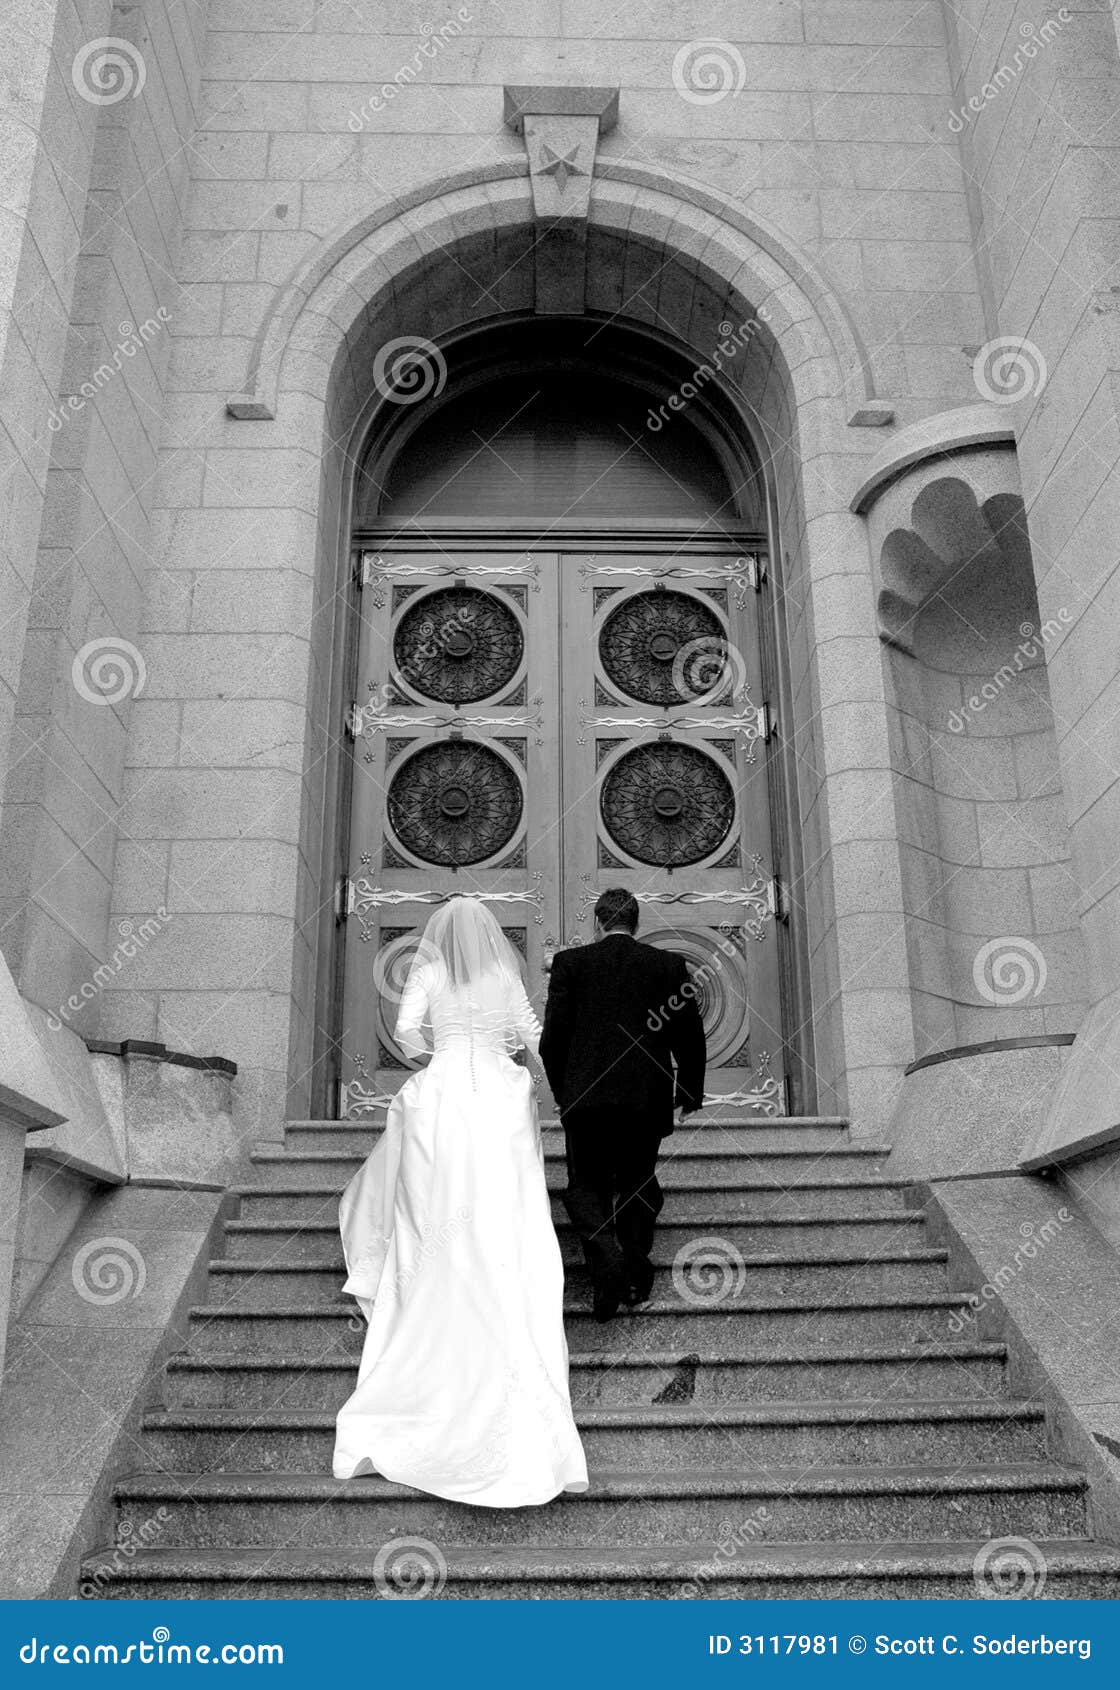 bride and groom ascend stairs